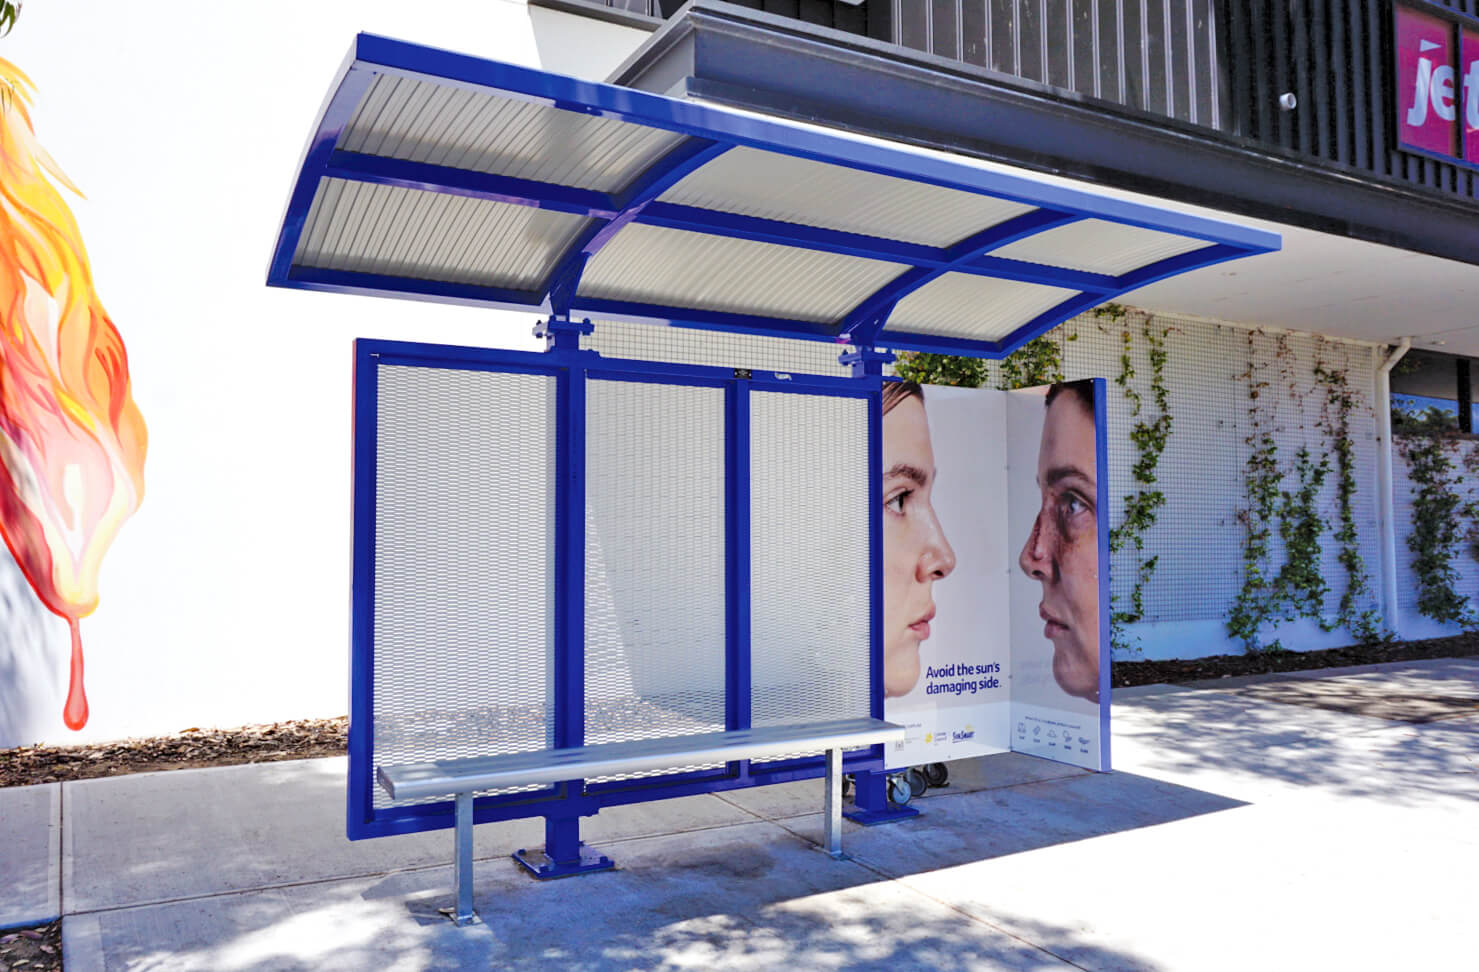 Bus stop featuring Cancer Council advertising campaign